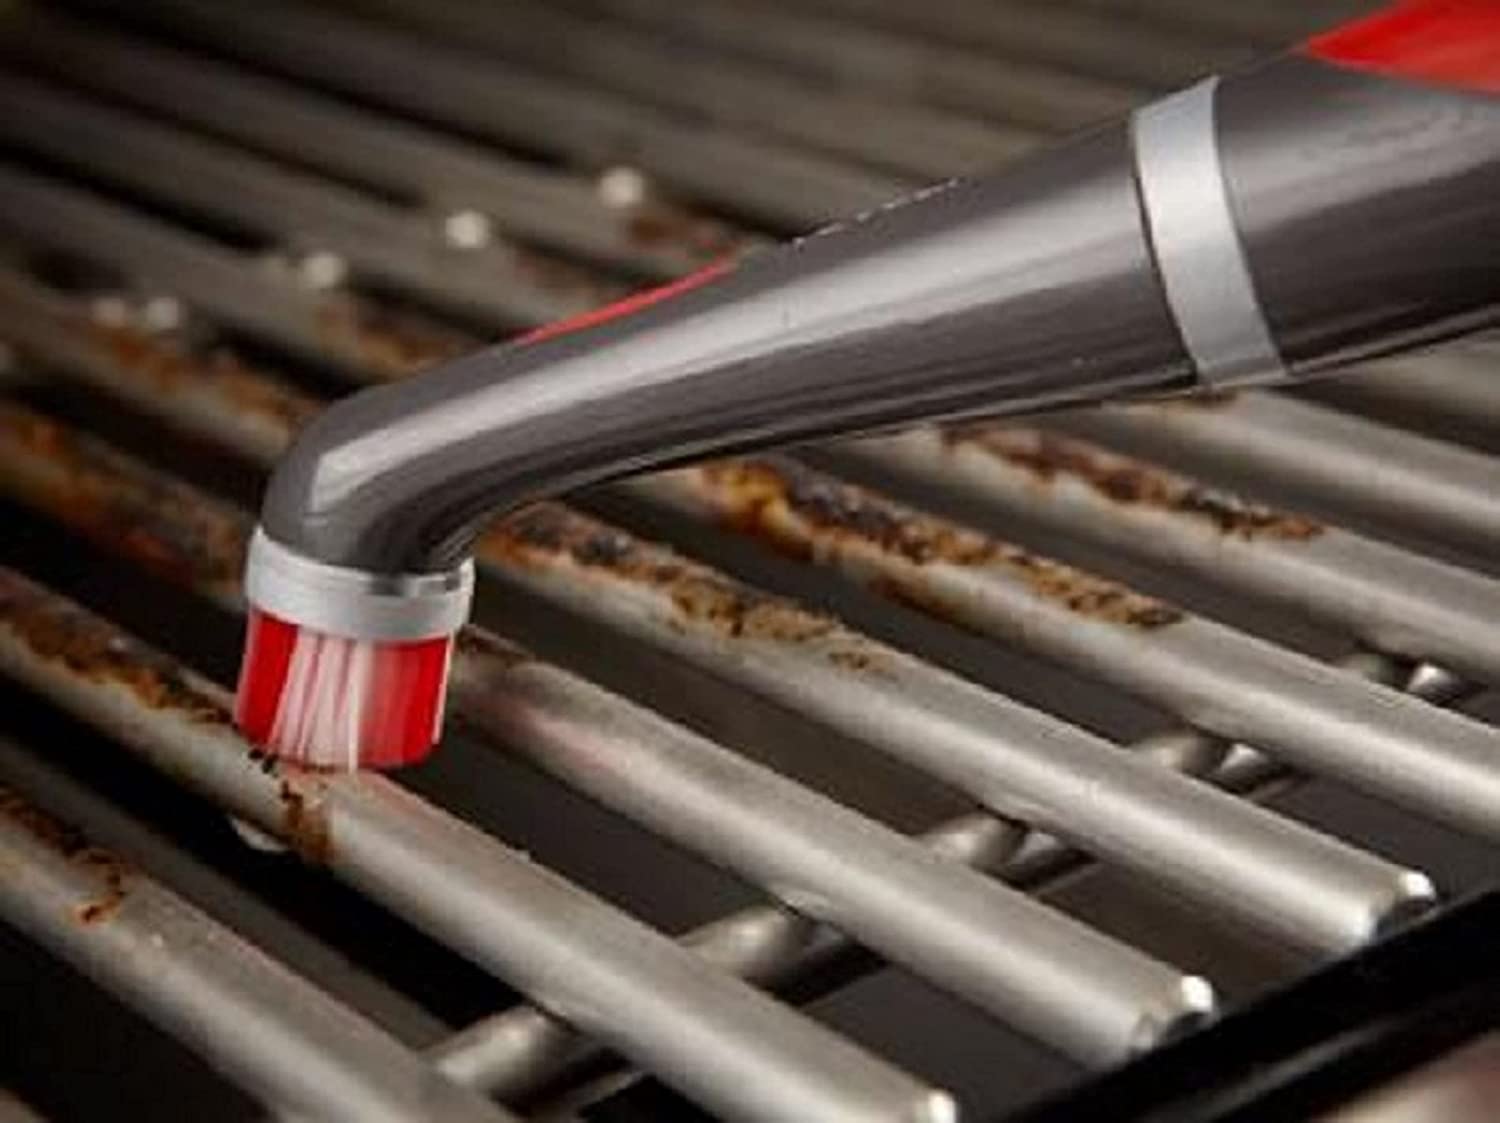 power scrubber on grill